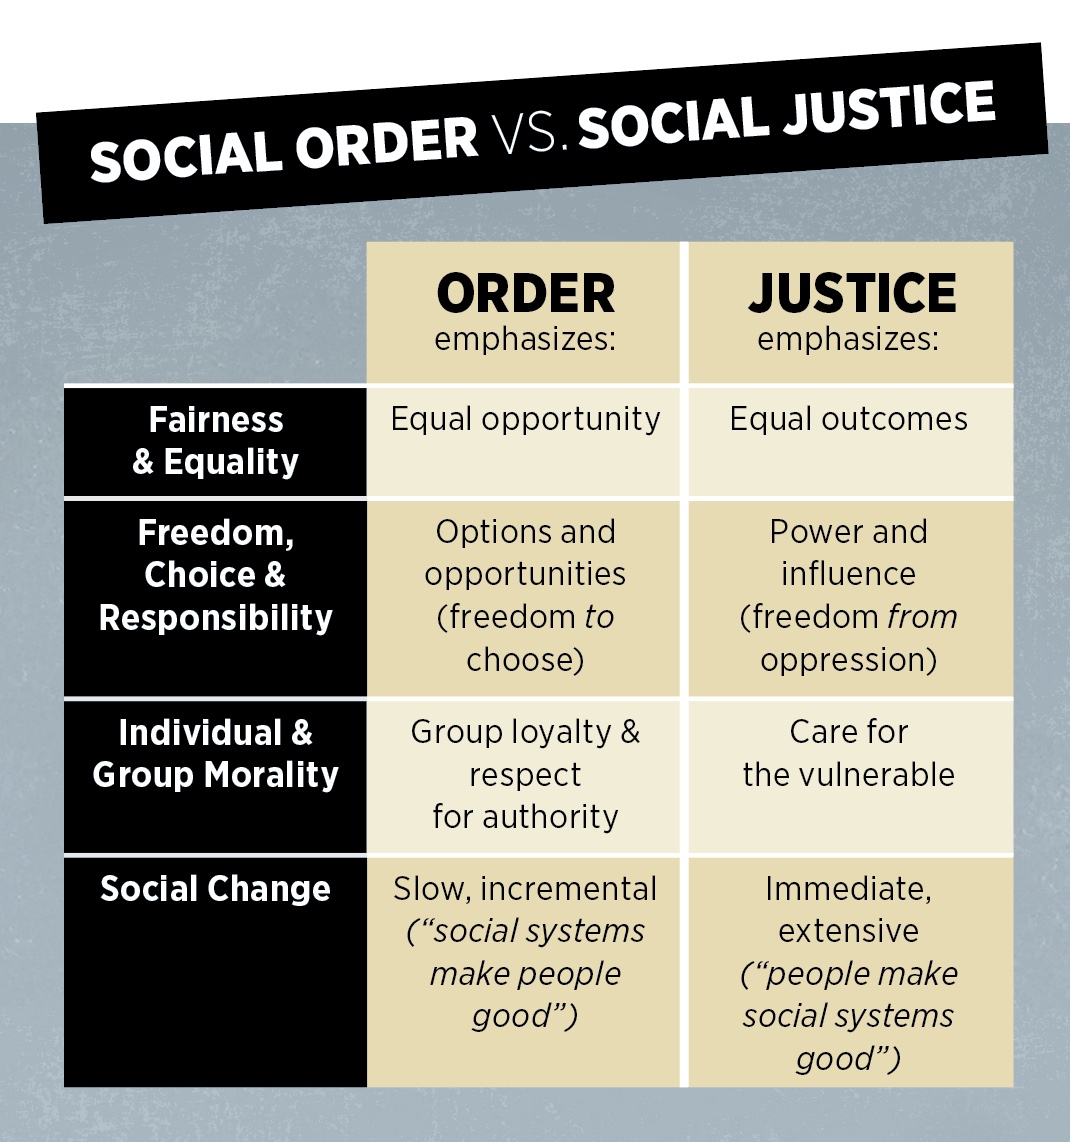 graphic comparing social justice and social order tenets